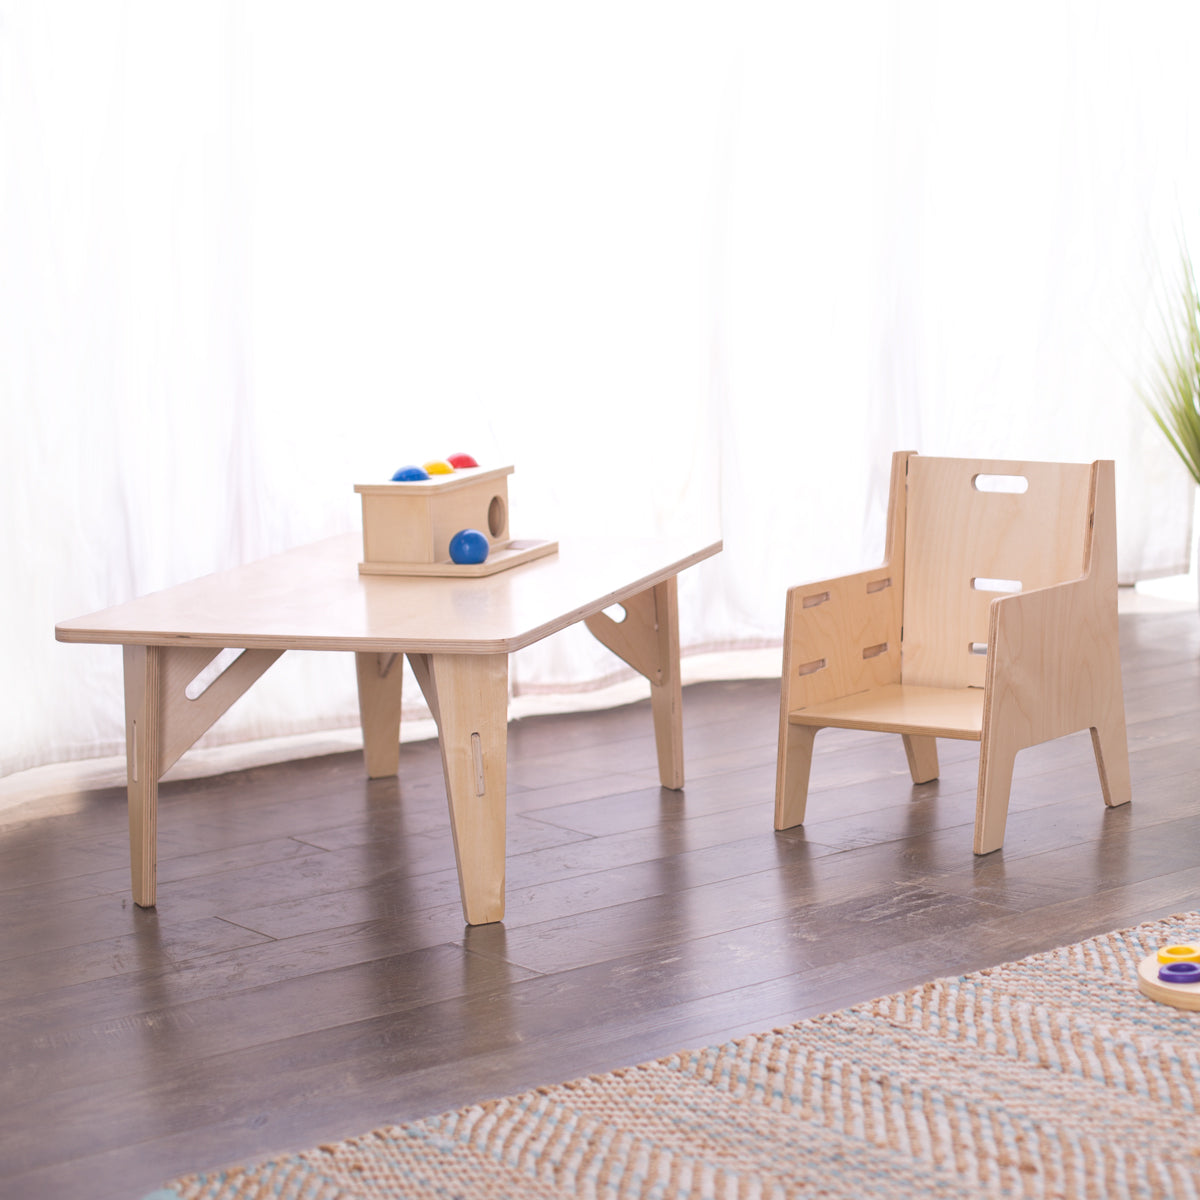 Weaning Tables to Love - Montessori Baby Week 25